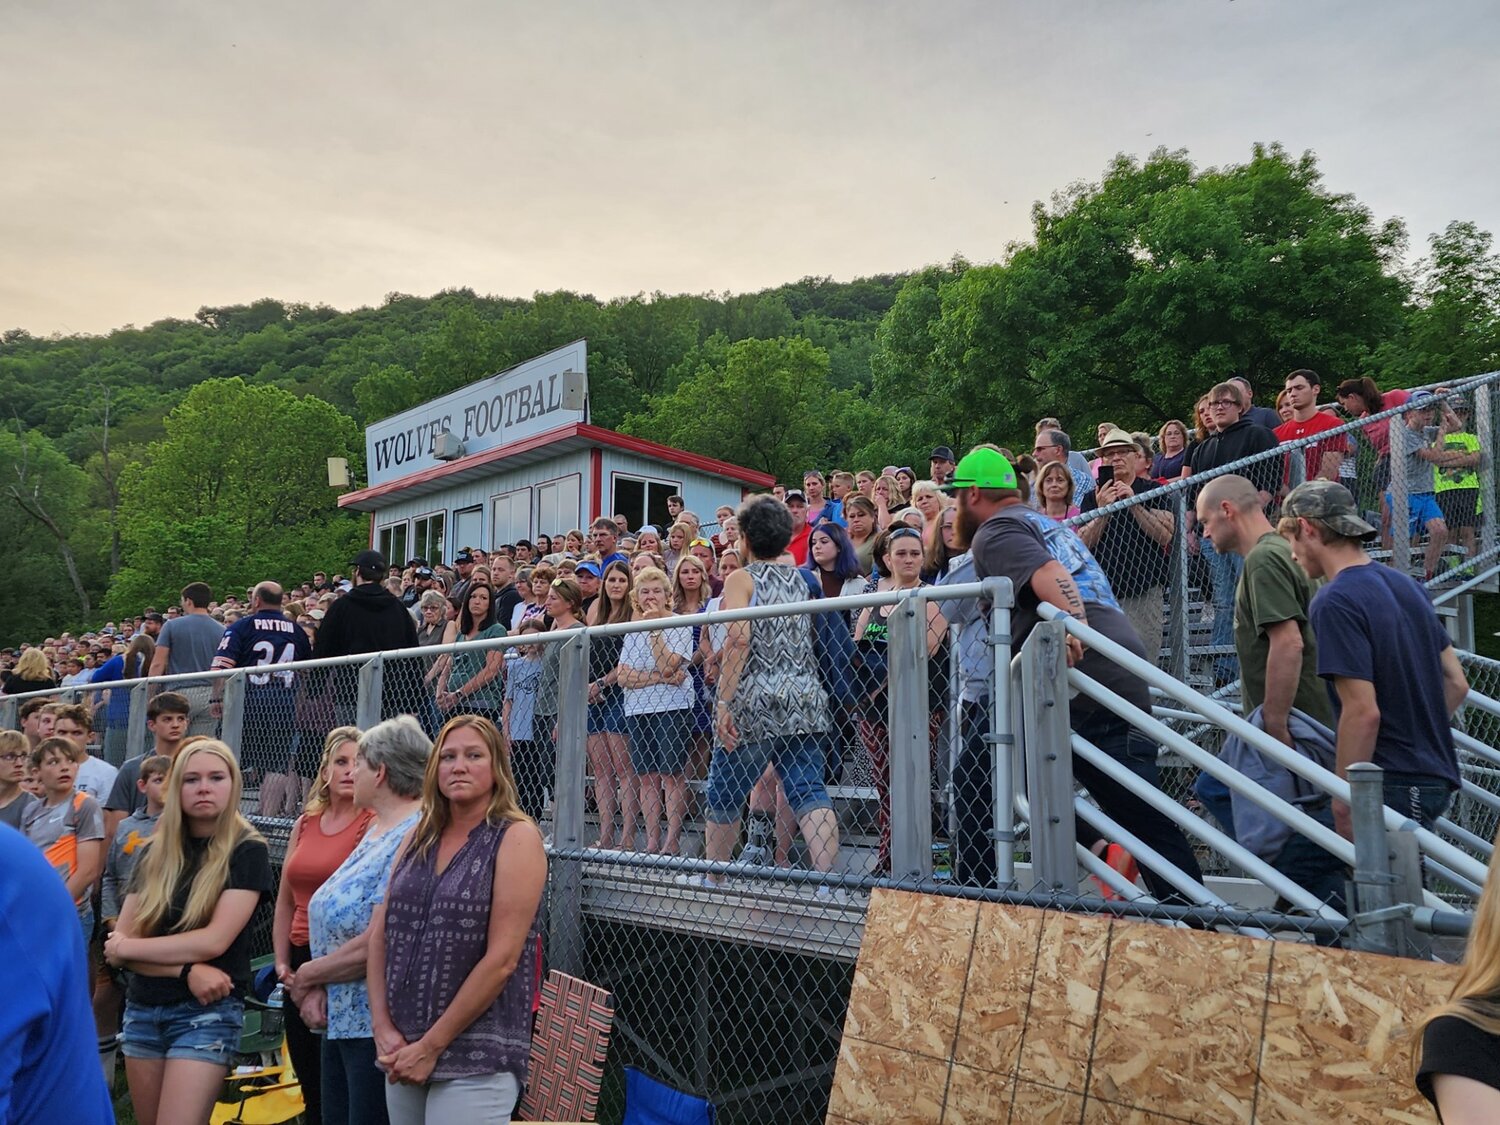 Prayer vigil attendees stand silently as members of the Bleskacek and Loga families file onto the bleachers at a May 31 prayer vigil in Elmwood.